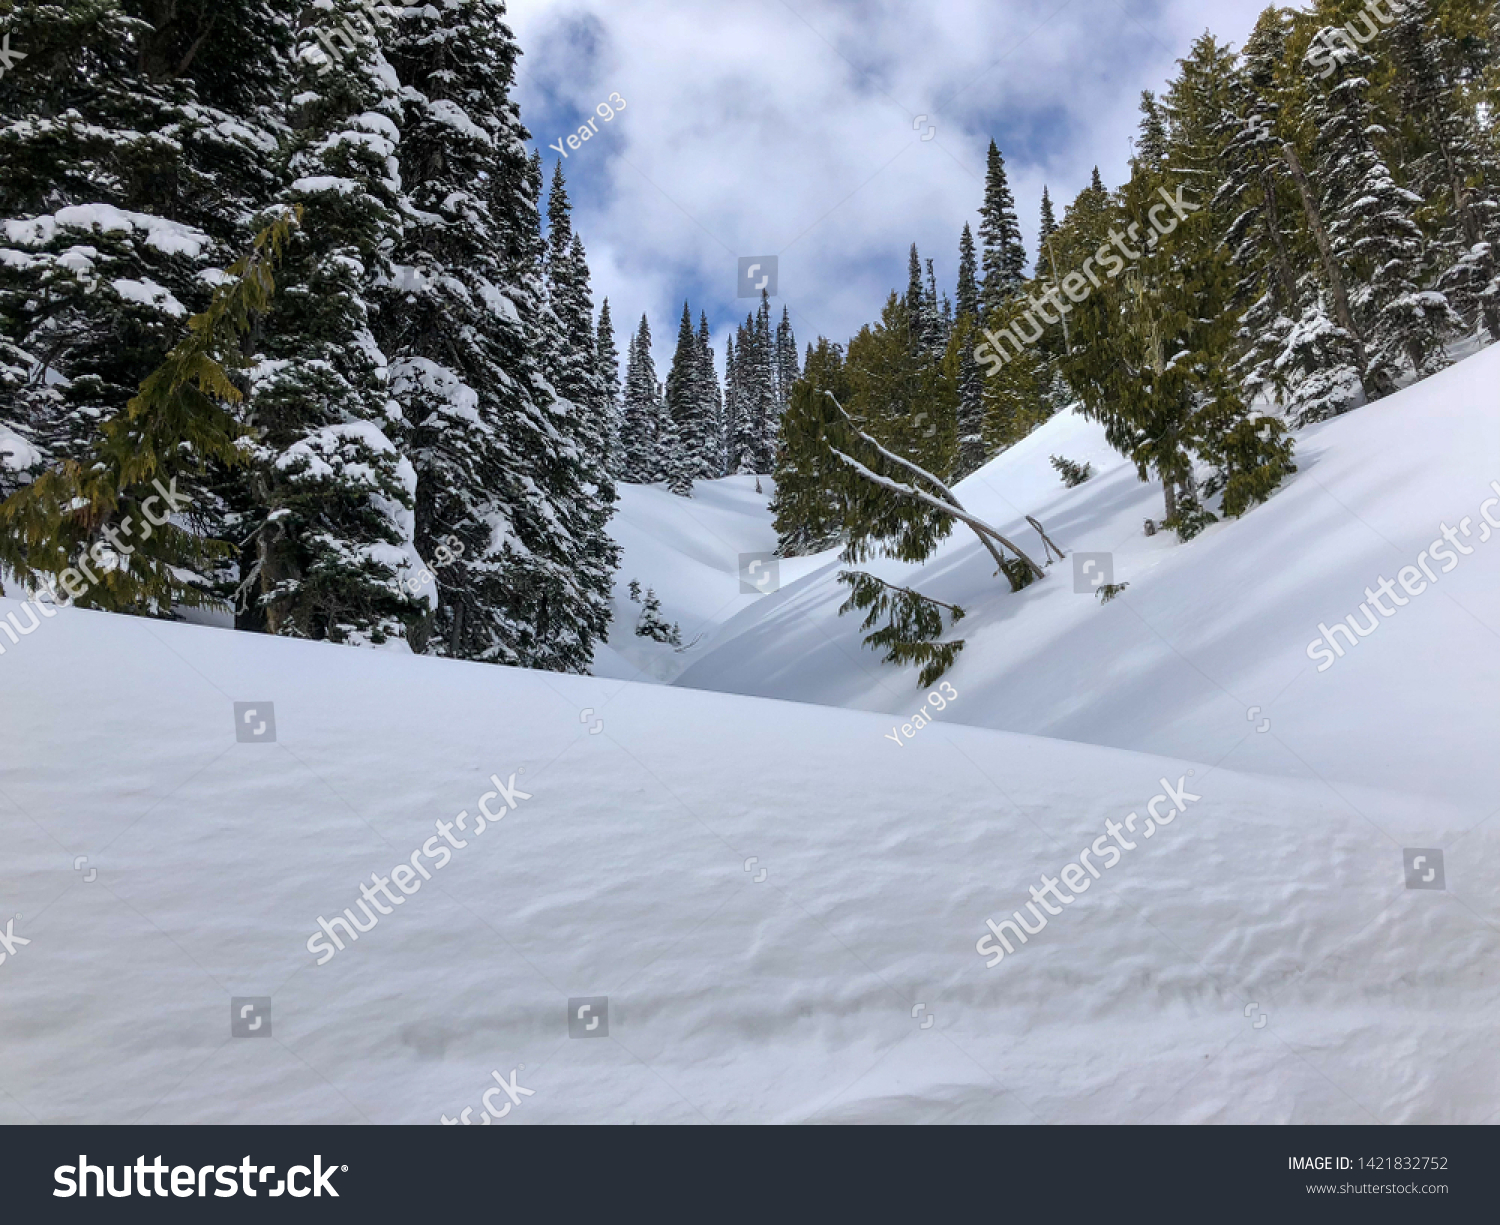 Snowy evergreens & mountain tops. Take a look at these beautiful shots of Washington States Mount Rainier. #1421832752